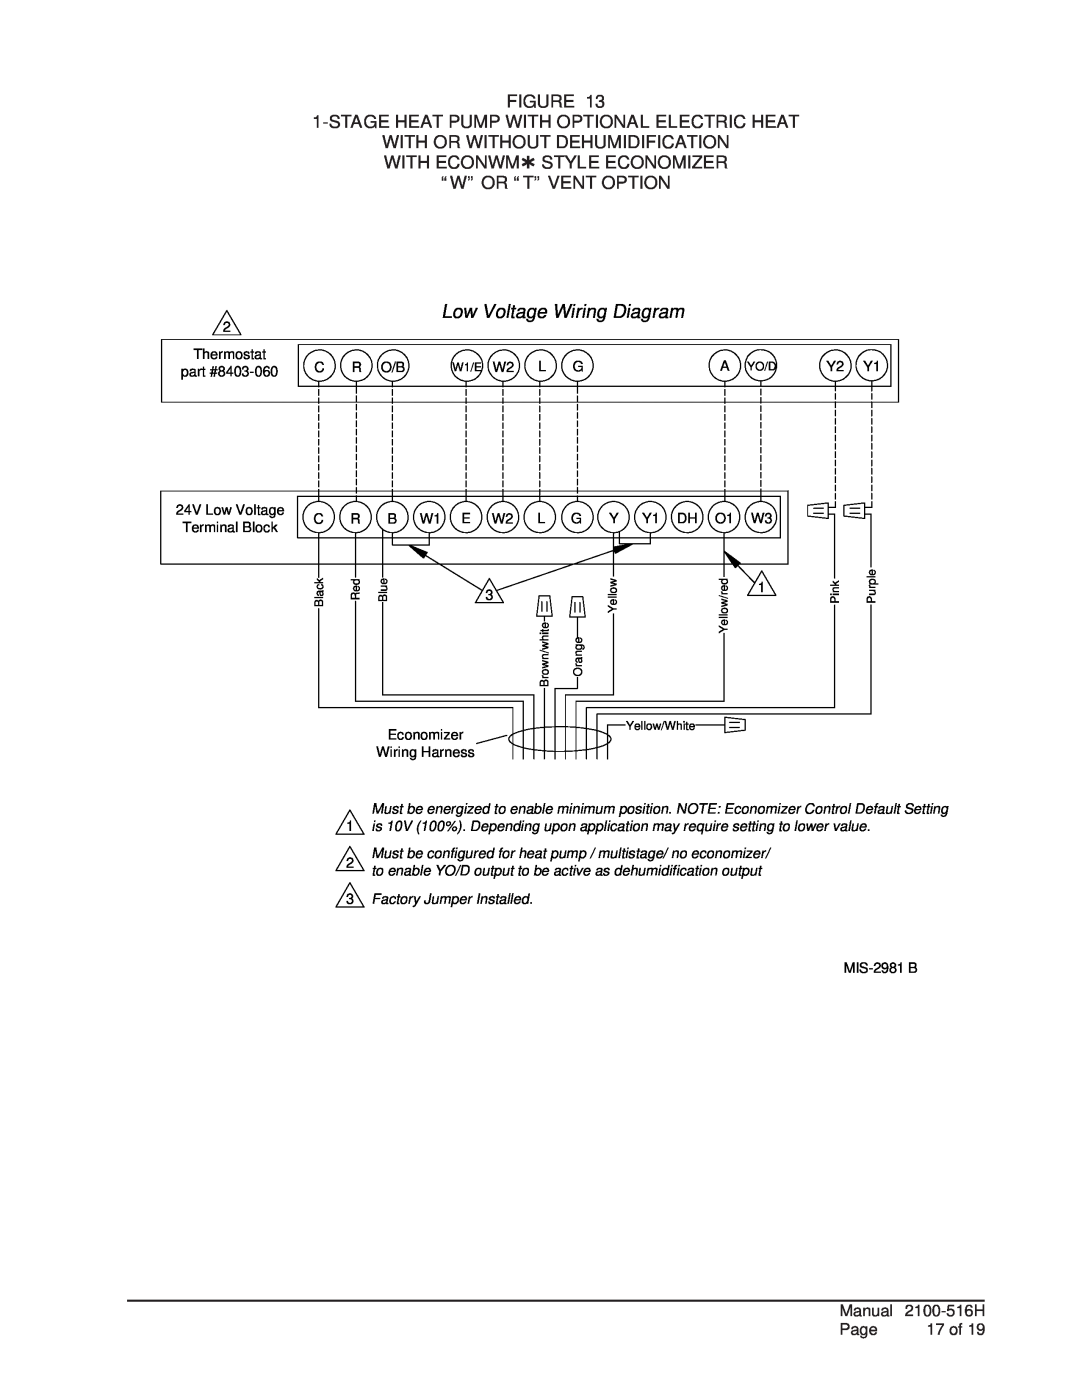 Bard S**H, W**H Low Voltage Wiring Diagram, Stageheat Pump With Optional Electric Heat, With Or Without Dehumidification 